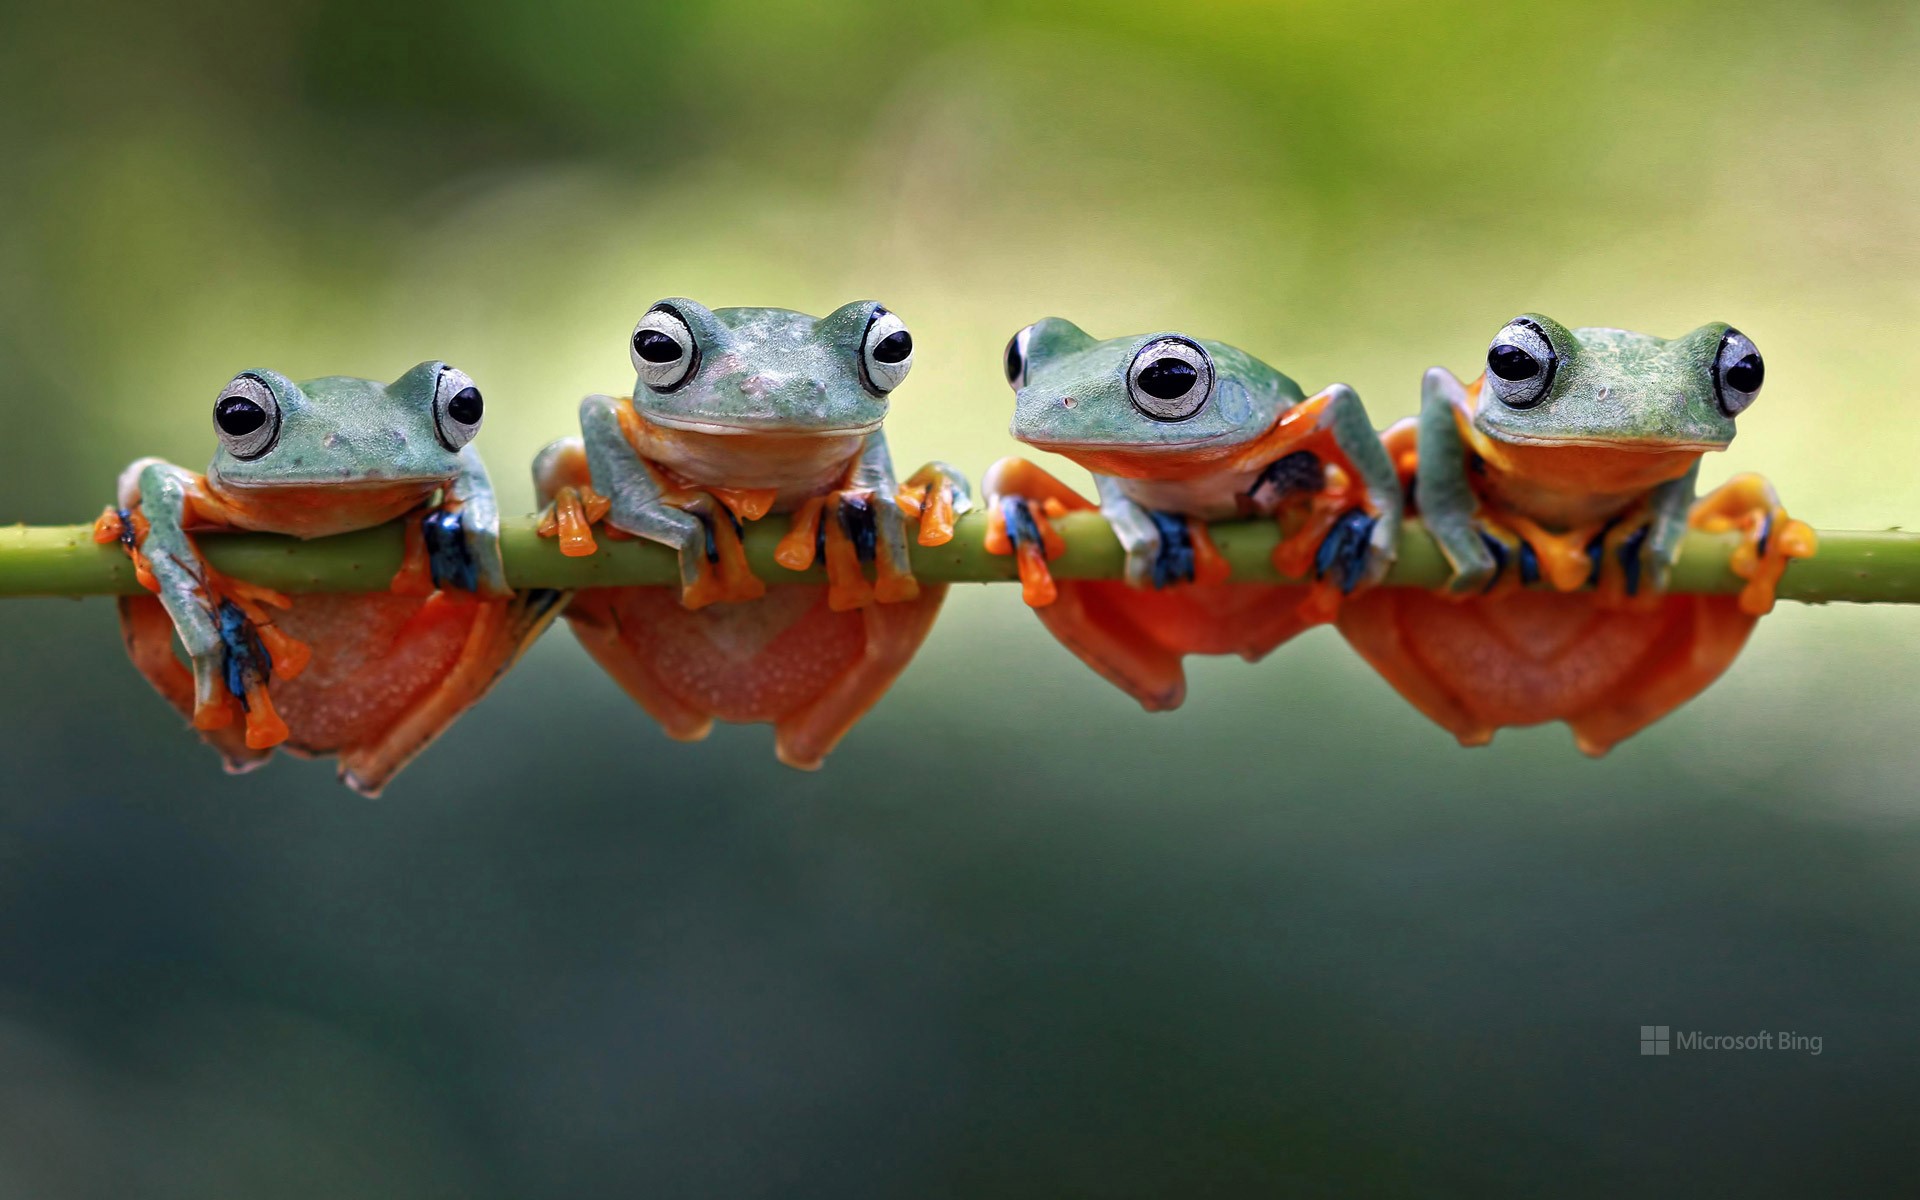 Four Javan tree frogs sitting together on a stalk in Indonesia